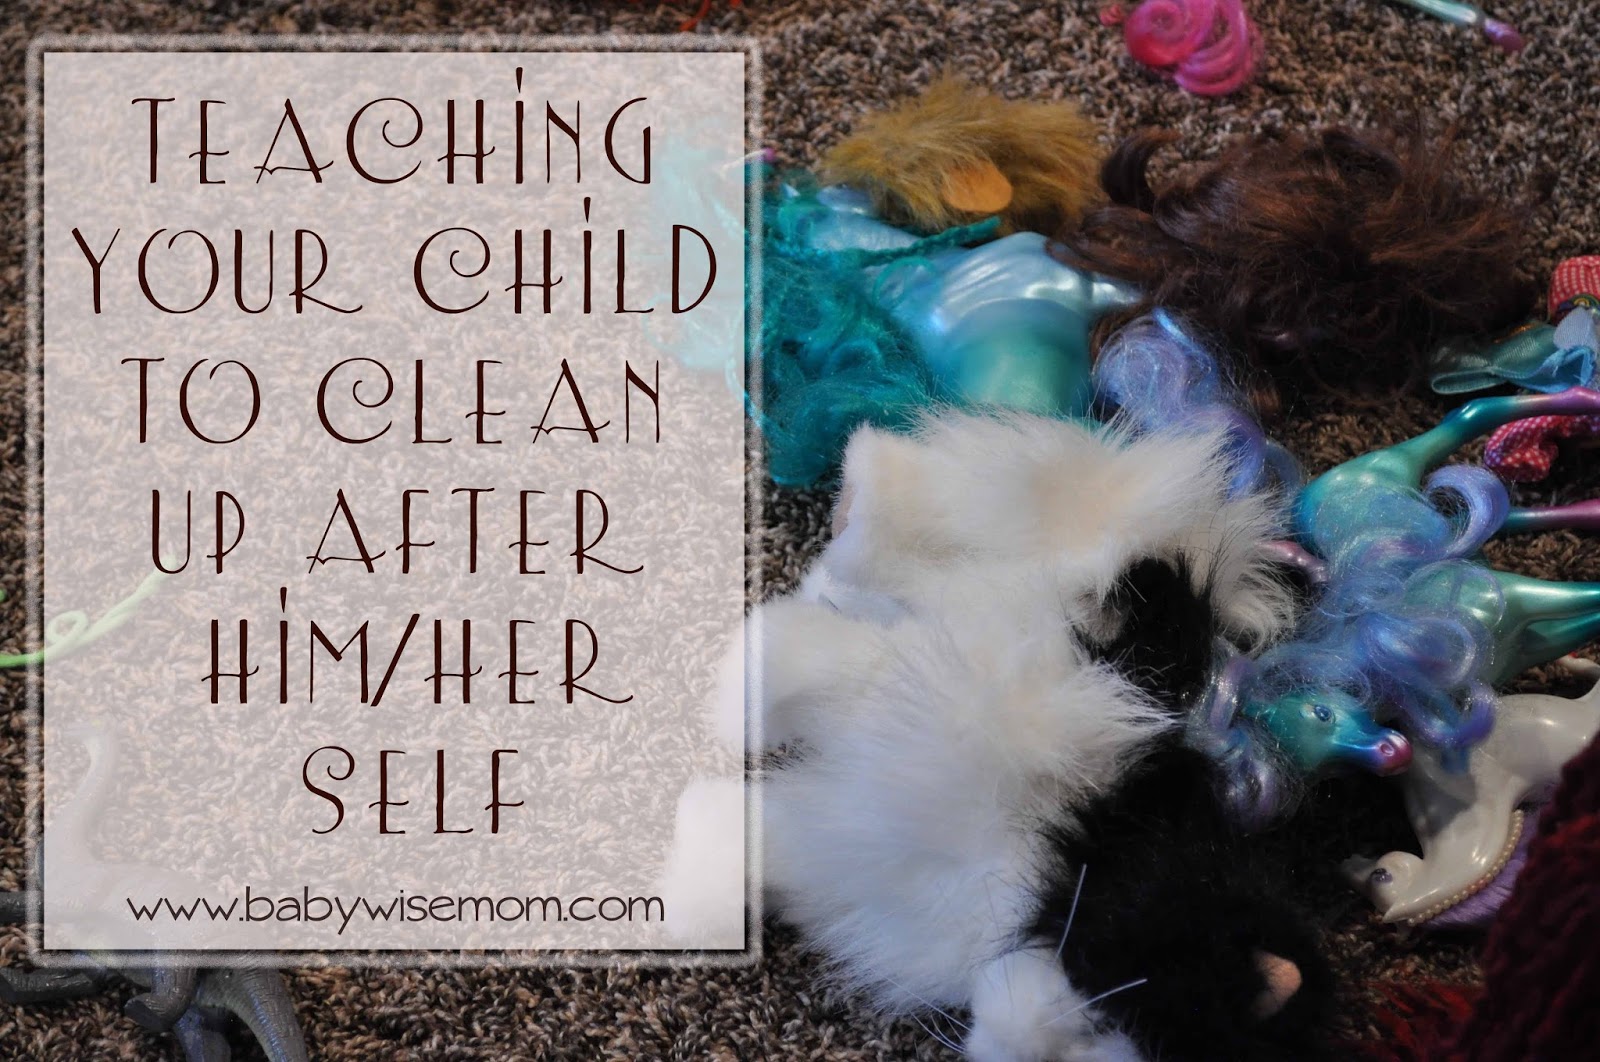 Teaching Your Child To Clean Up After Self - Chronicles of a Babywise Mom1600 x 1062